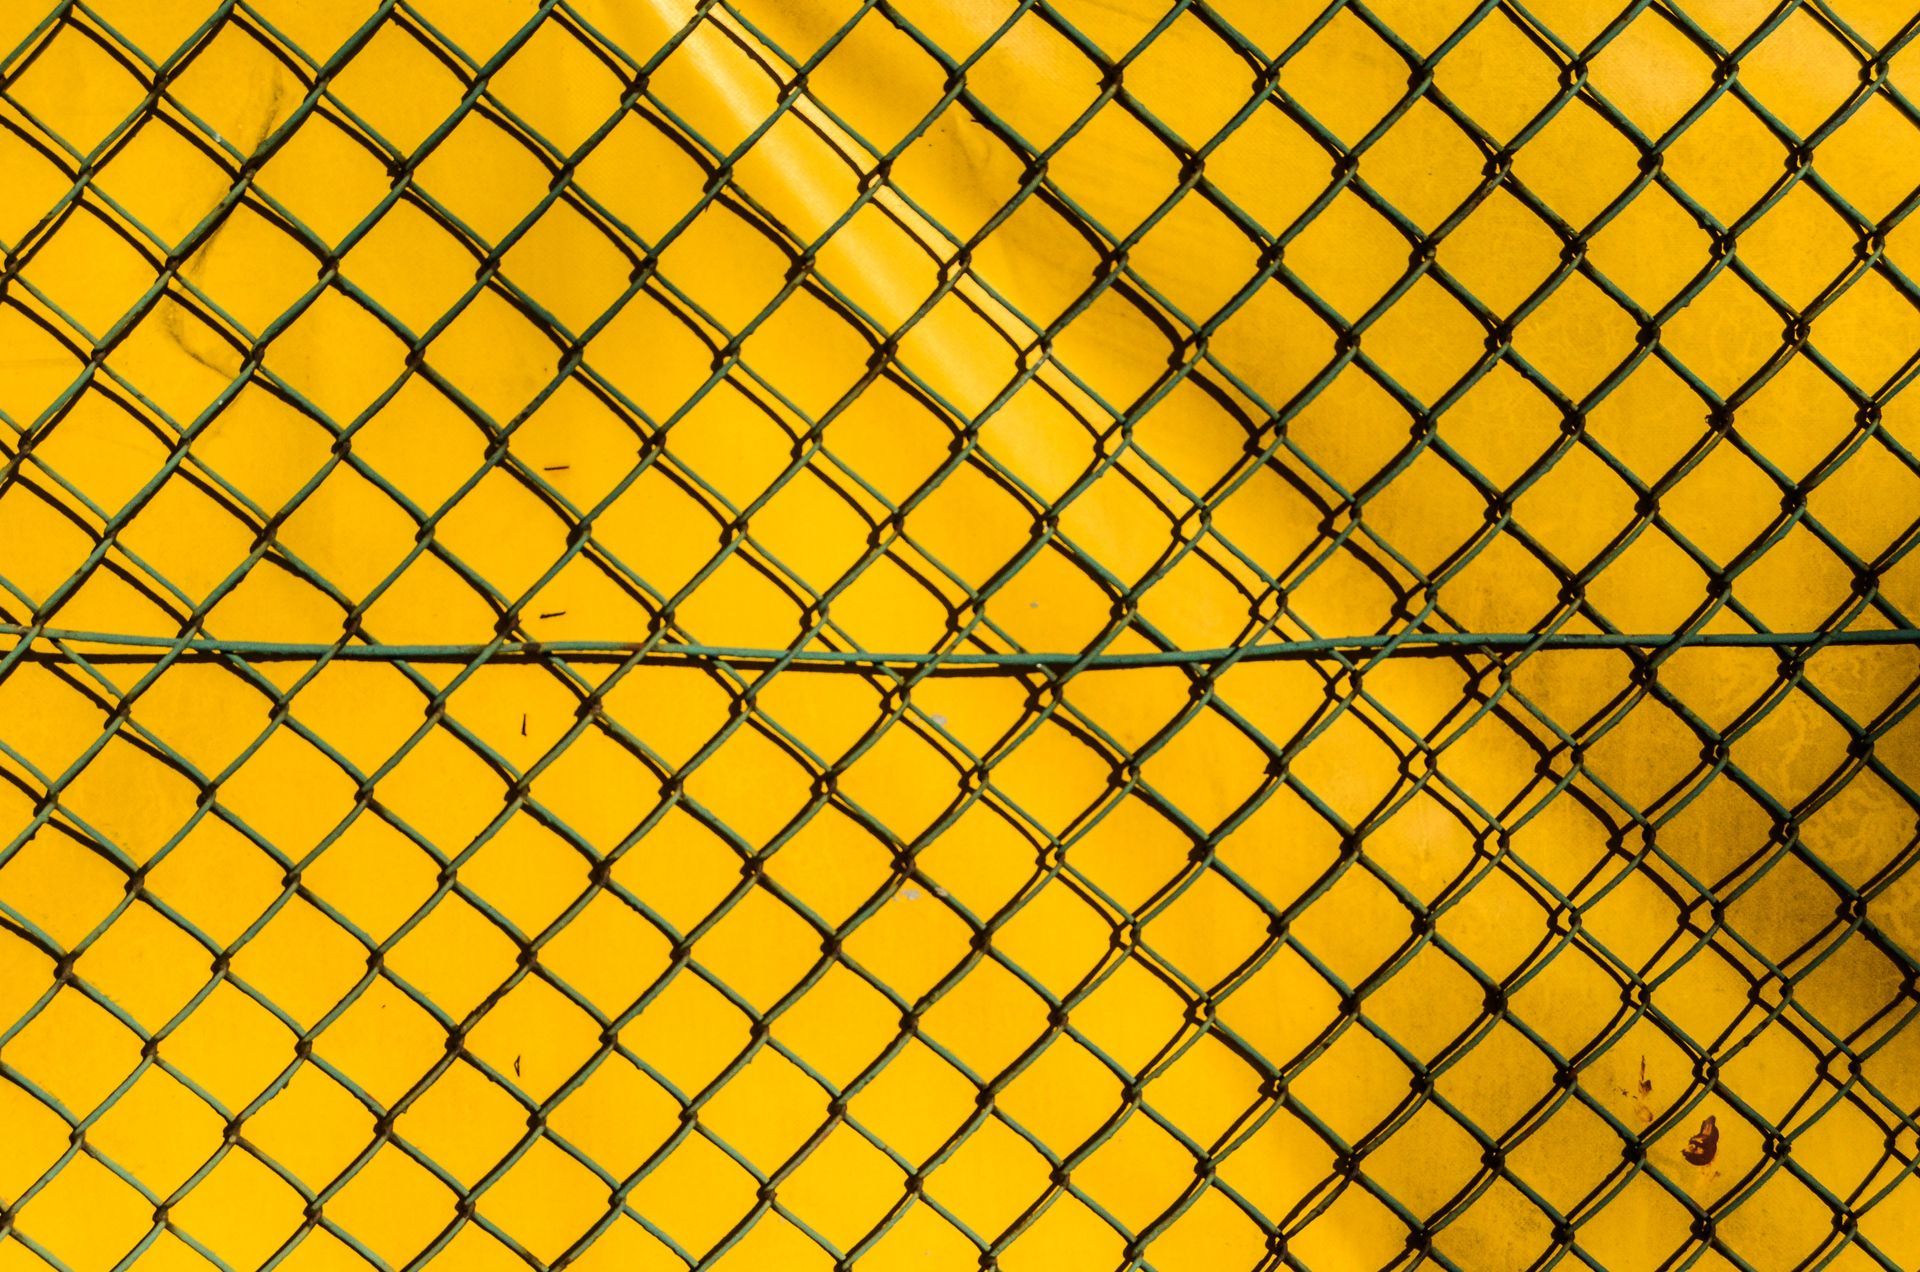 Chain Link Fence Peoria Il